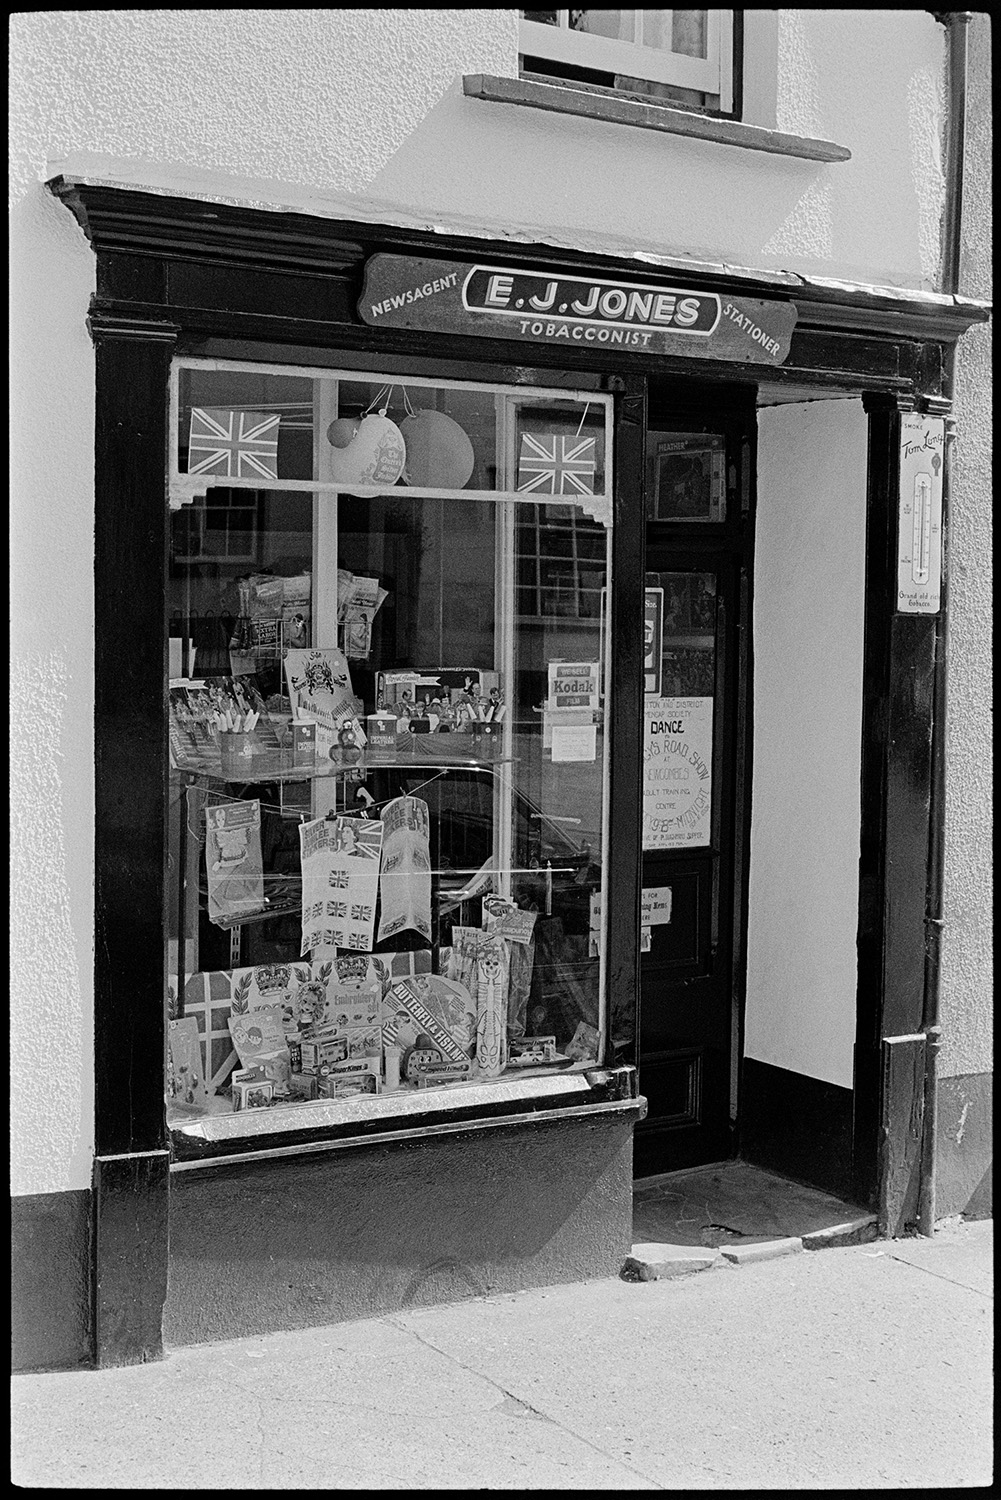 Newsagent and tobacconists shop. 
[The shop front window of E J Jones, Tobacconist, Newsagent and Stationer in Winkleigh. The window is decorated with Union Jack flags, balloons and royal memorabilia to celebrate the Silver Jubilee of Queen Elizabeth II.]